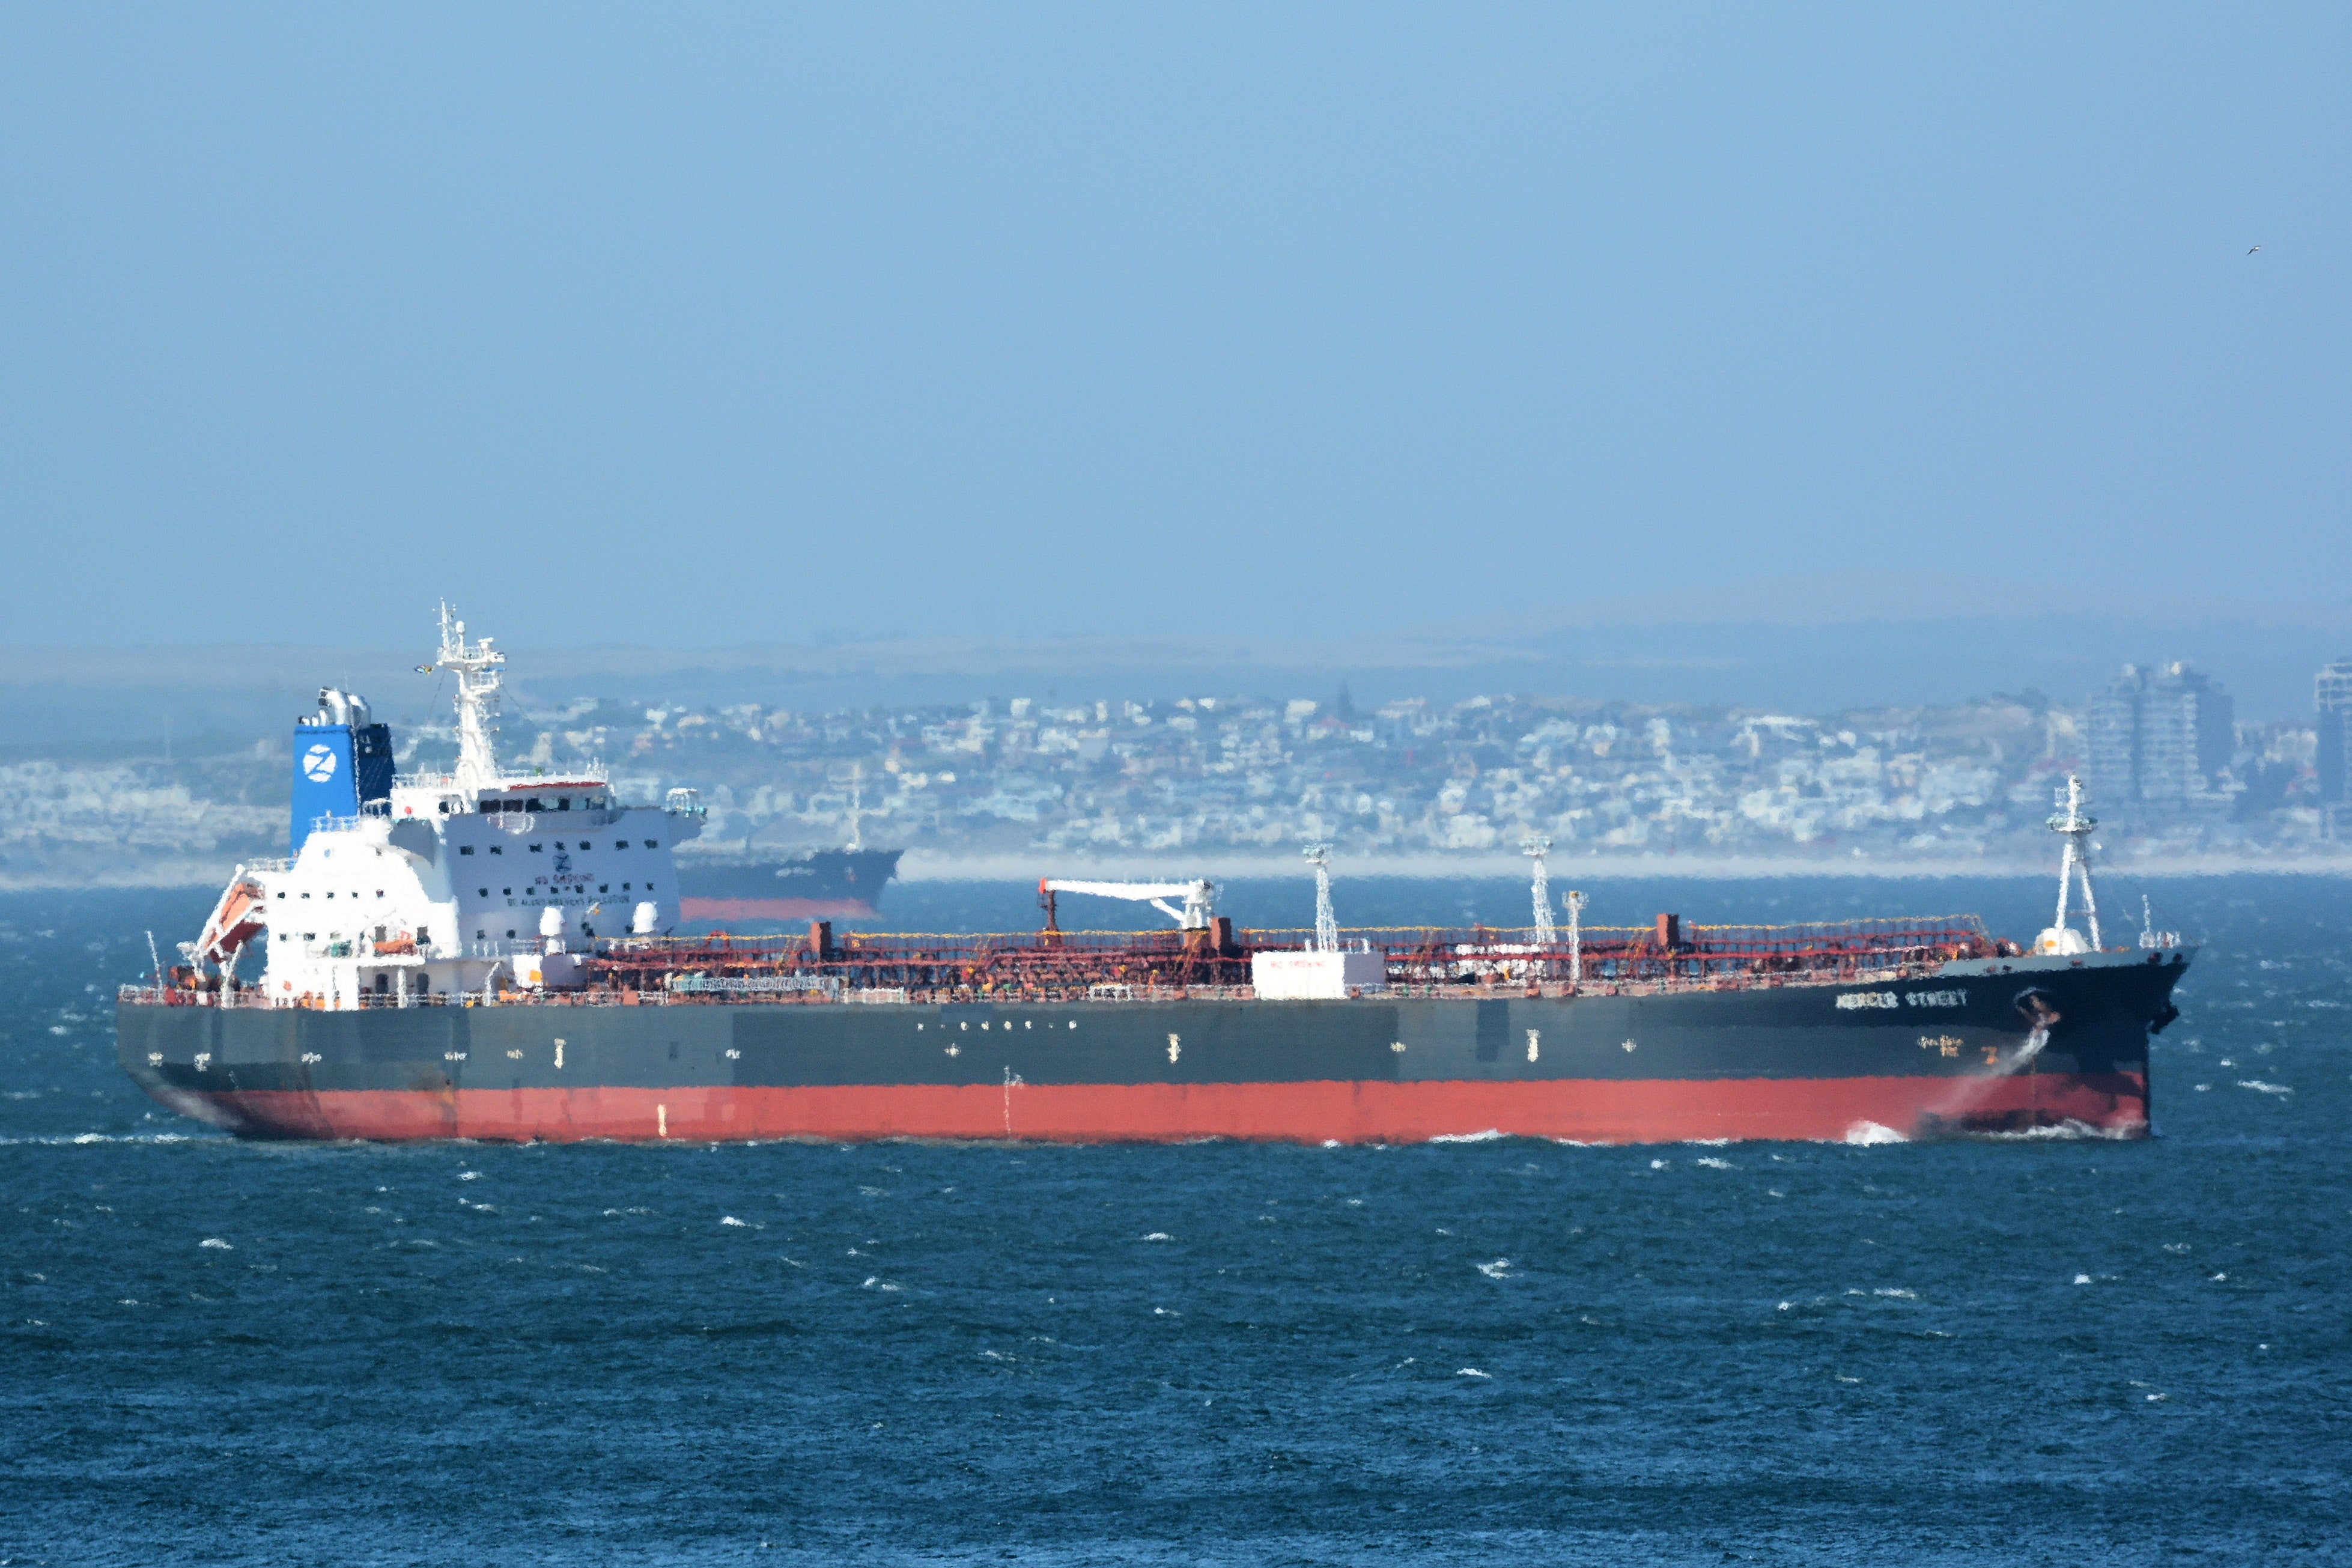 The Mercer Street, a Japanese-owned Liberian-flagged tanker managed by Israeli-owned Zodiac Maritime that was attacked off Oman coast as seen in Cape Town, South Africa, December 31, 2015 in this picture obtained from ship tracker website, MarineTraffic.com.